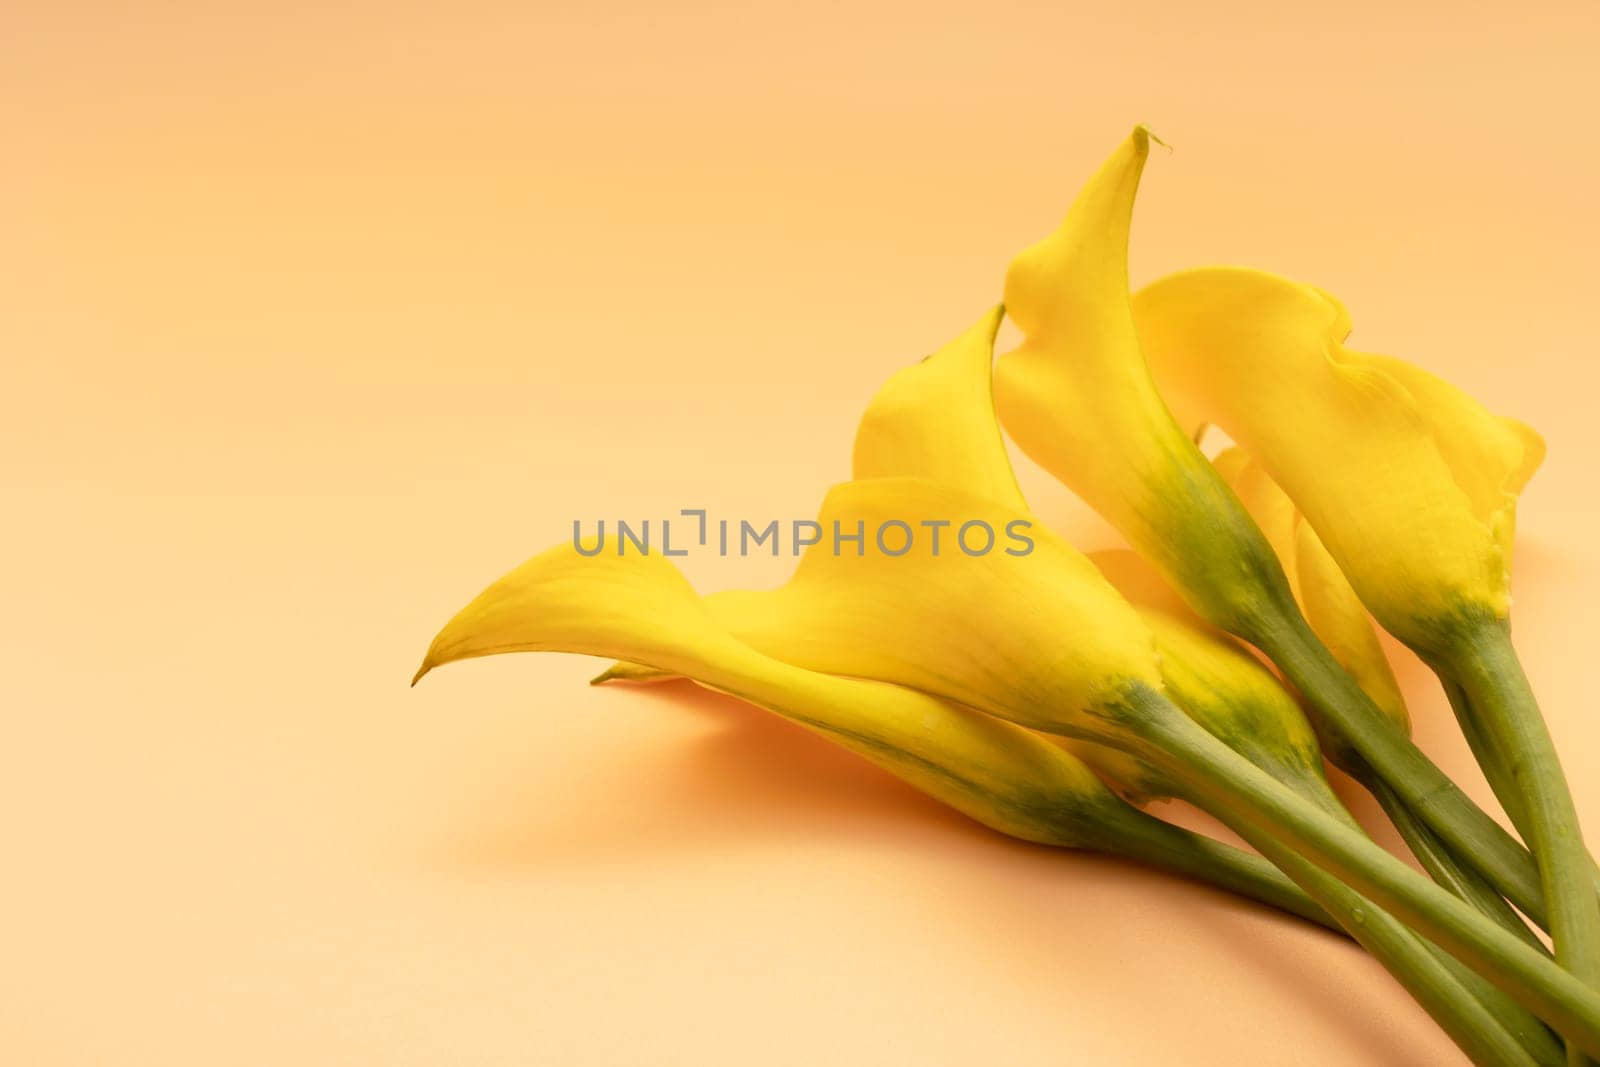 Design Beautiful Yellow Calla Lily, Zantedeschia Flower Or Arum Lily. Lovely Bouquet On Yellow Peach Background. Floral Shop, Plant, Template Botany. Copy Space. Horizontal Plane